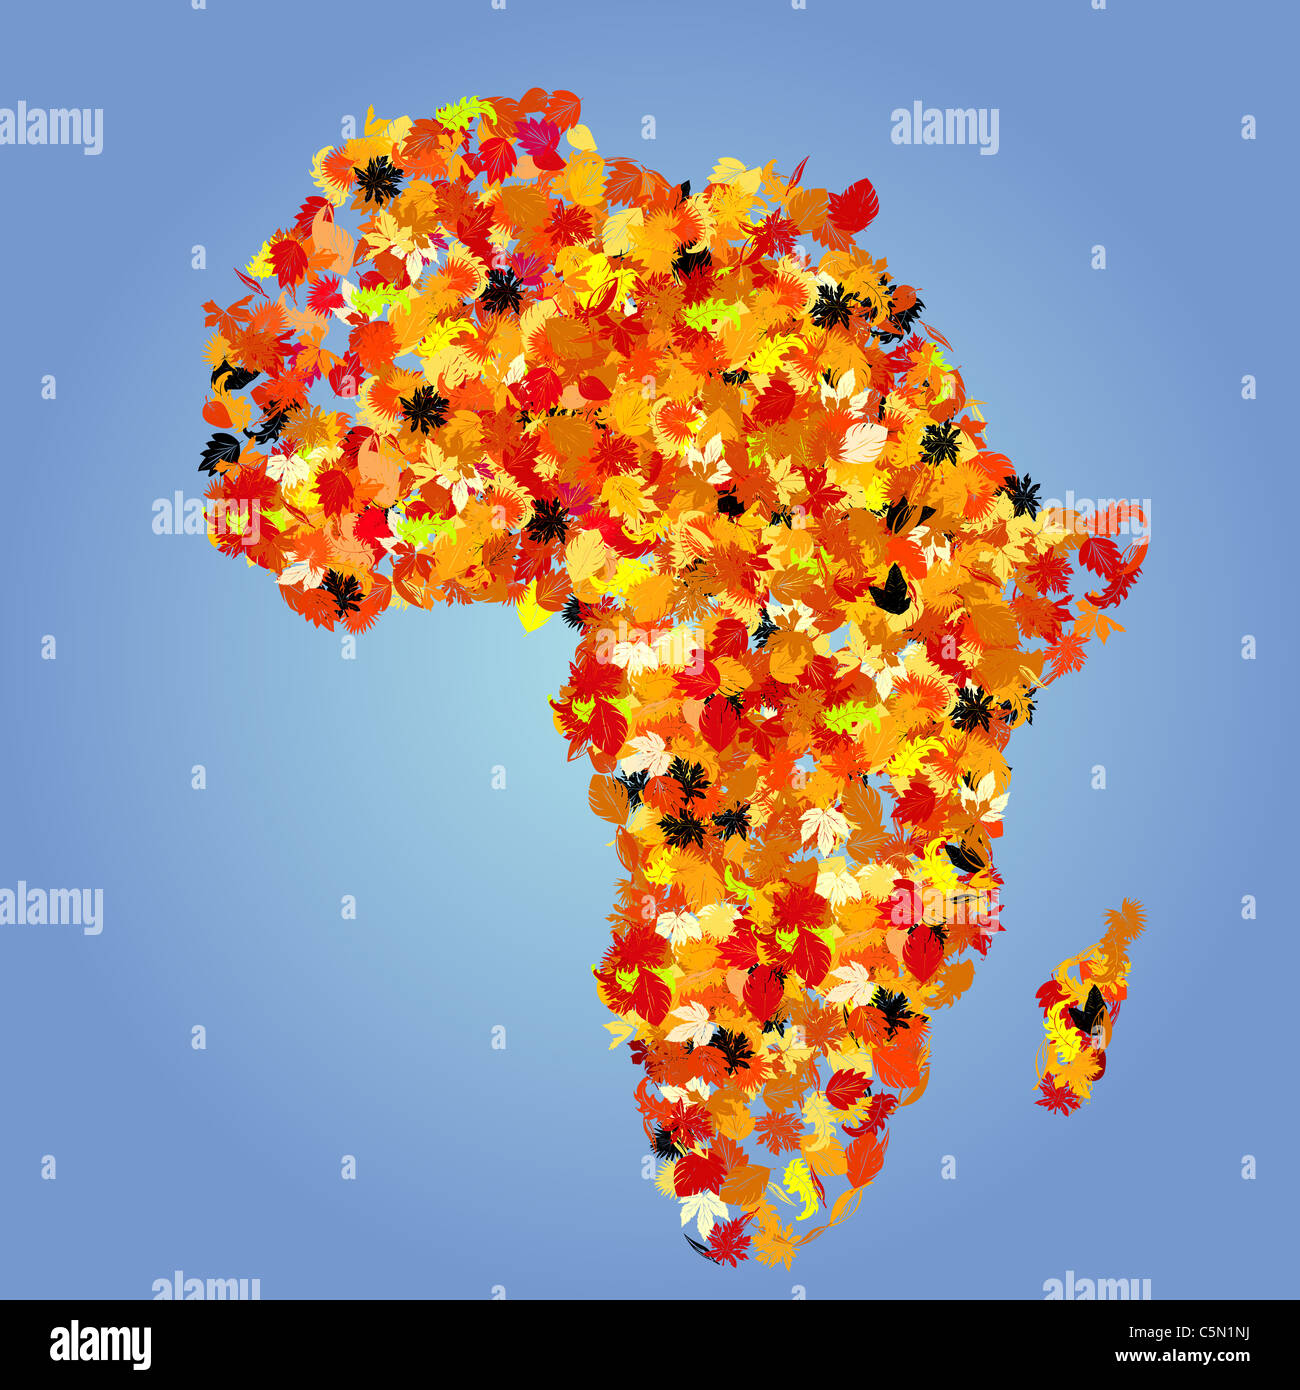 Africa map, autumn leaves collage Stock Photo